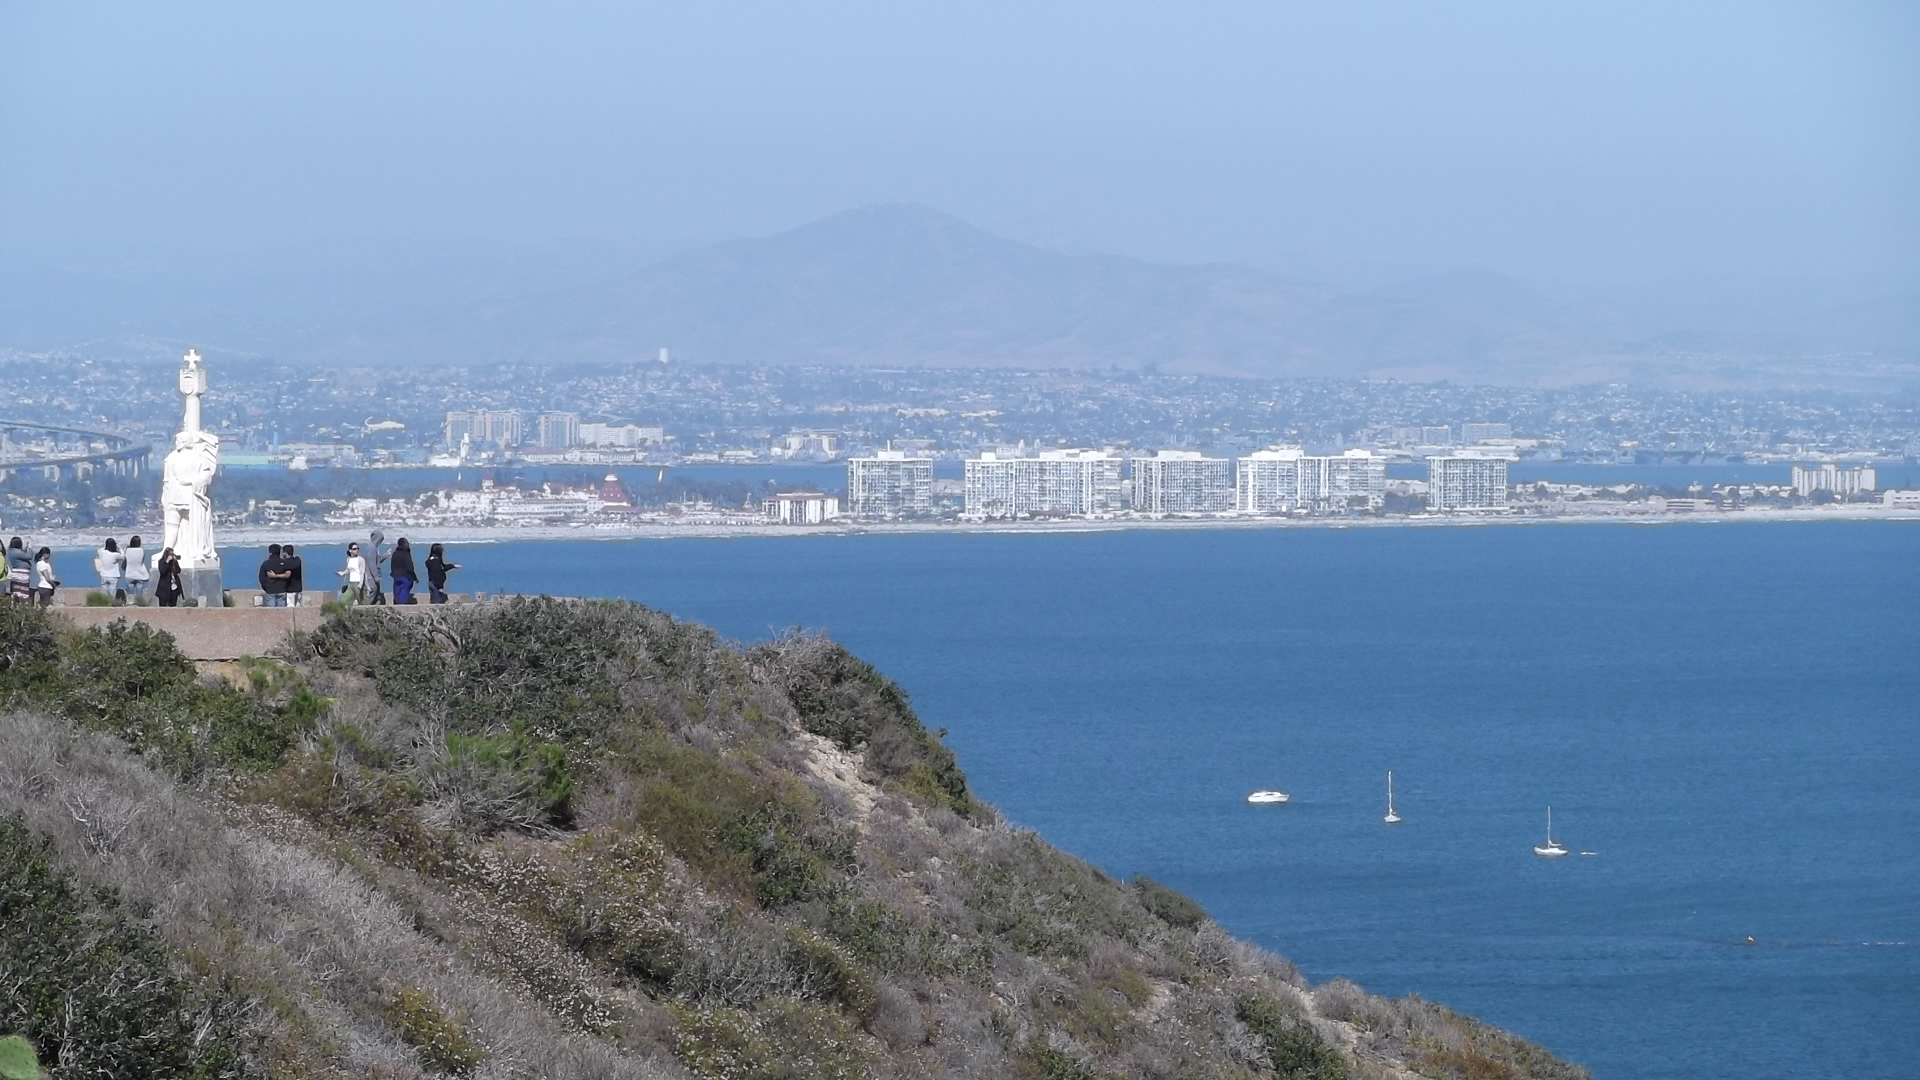 Looking out on San Diego from Cabrillo